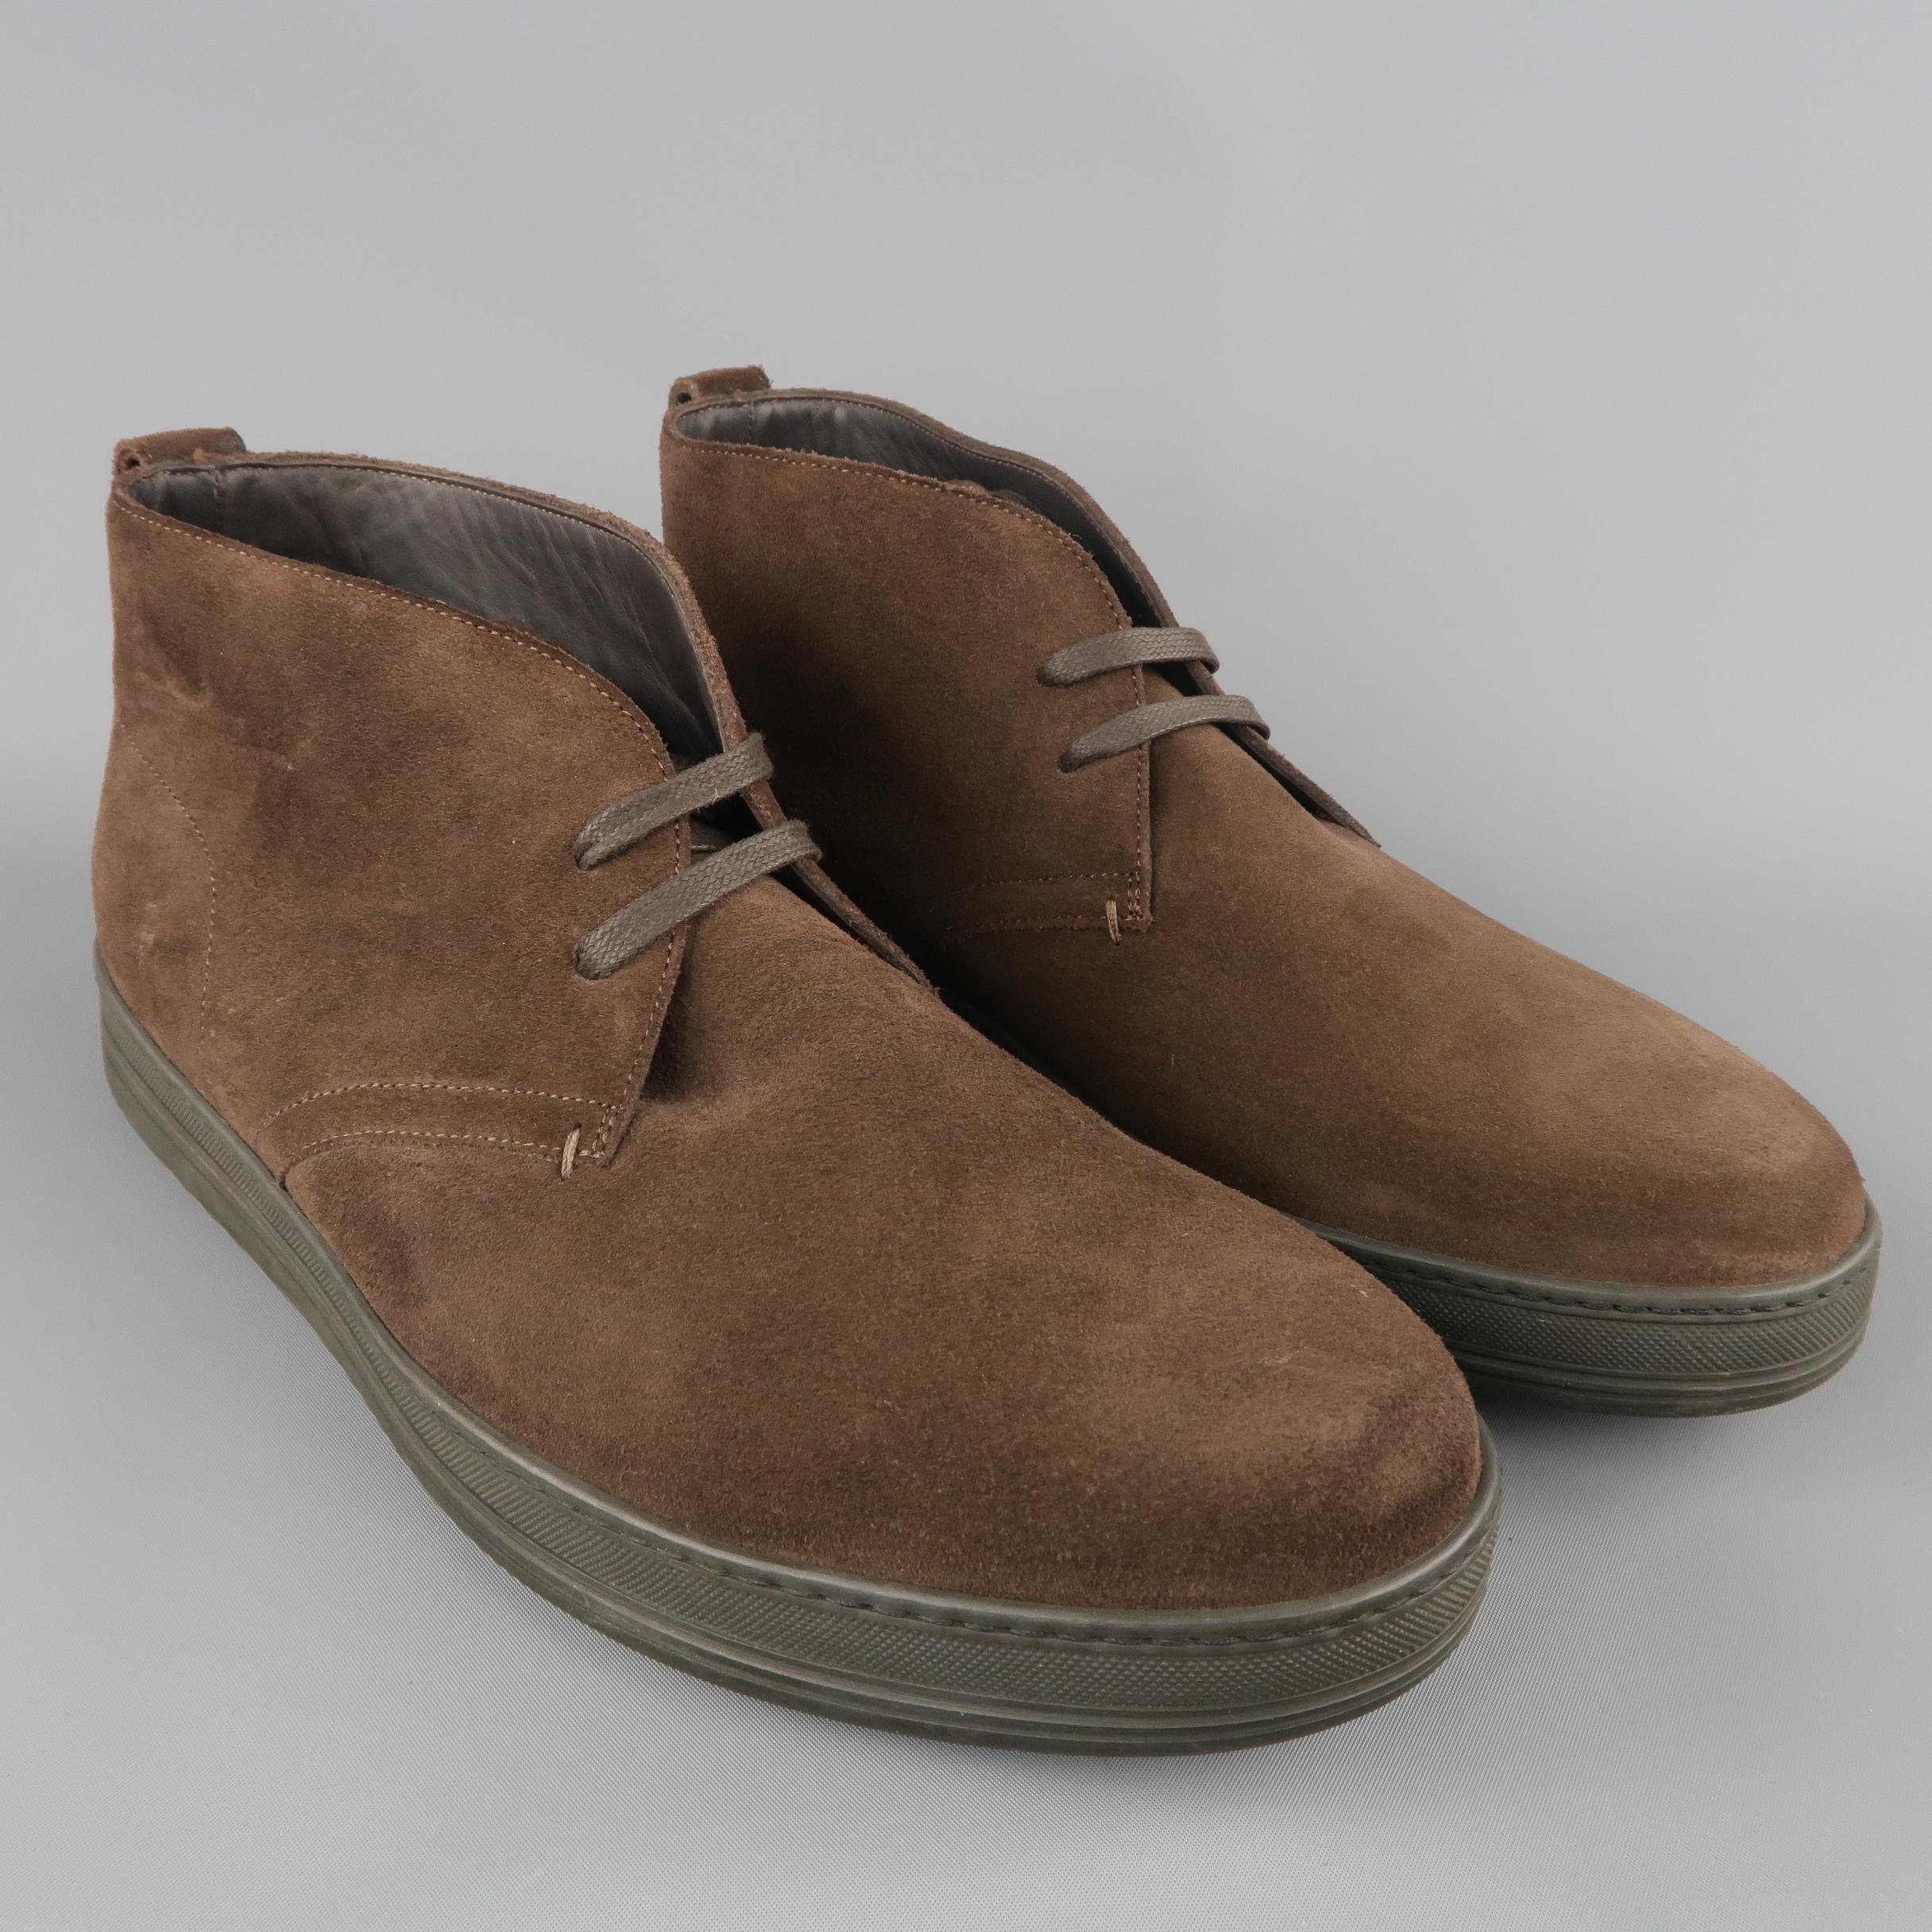 TOM FORD casual chukka boots come in rich brown suede with a round toe, lace up front, and thick rubber sole. Made in Italy.
 
Good Pre-Owned Condition.
Marked: IT 45, fit is closer to US 11
 
Outsole: 12 x 4 in.